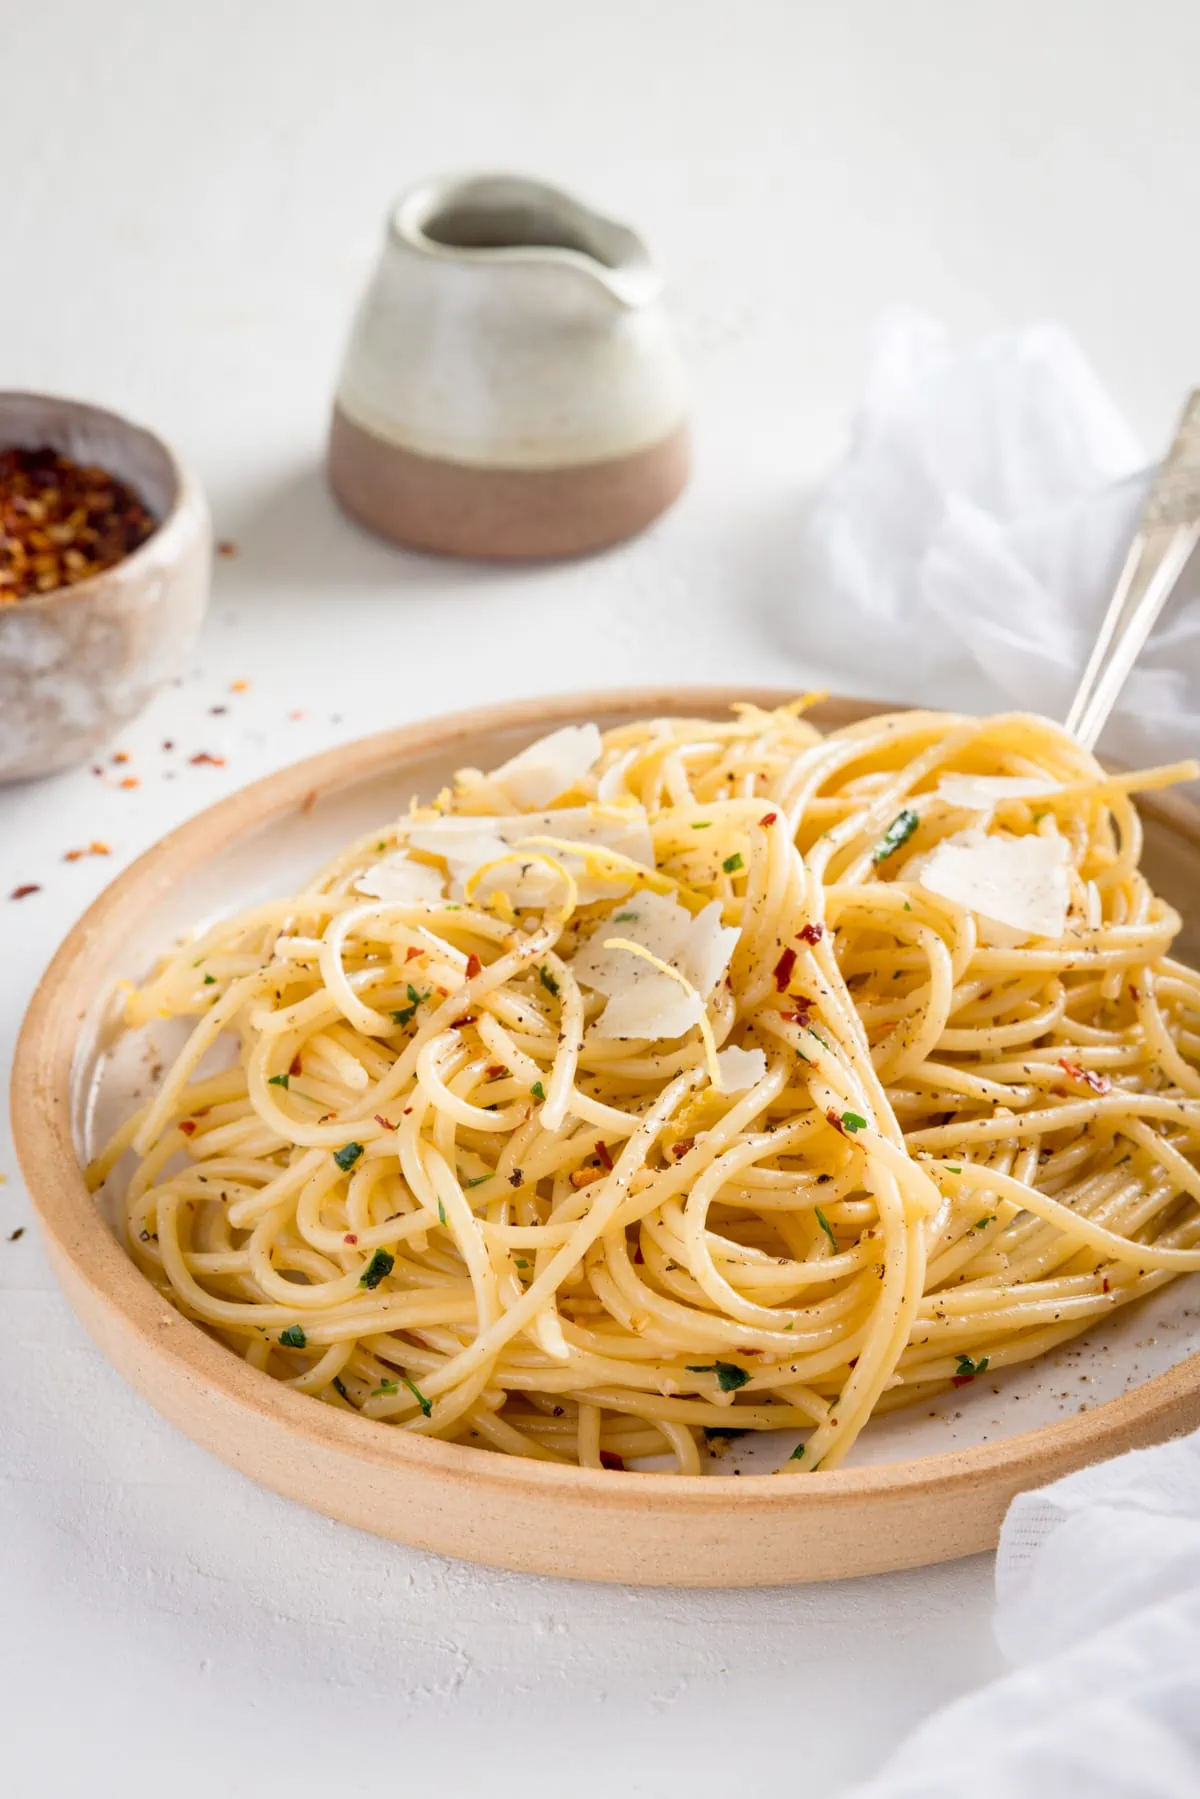 Spaghetti aglio e olio on white plate with a stone rim. The plate is on a white background next to a white napkin. There is a pinch pot of chilli flakes and a little stone jug also in shot.